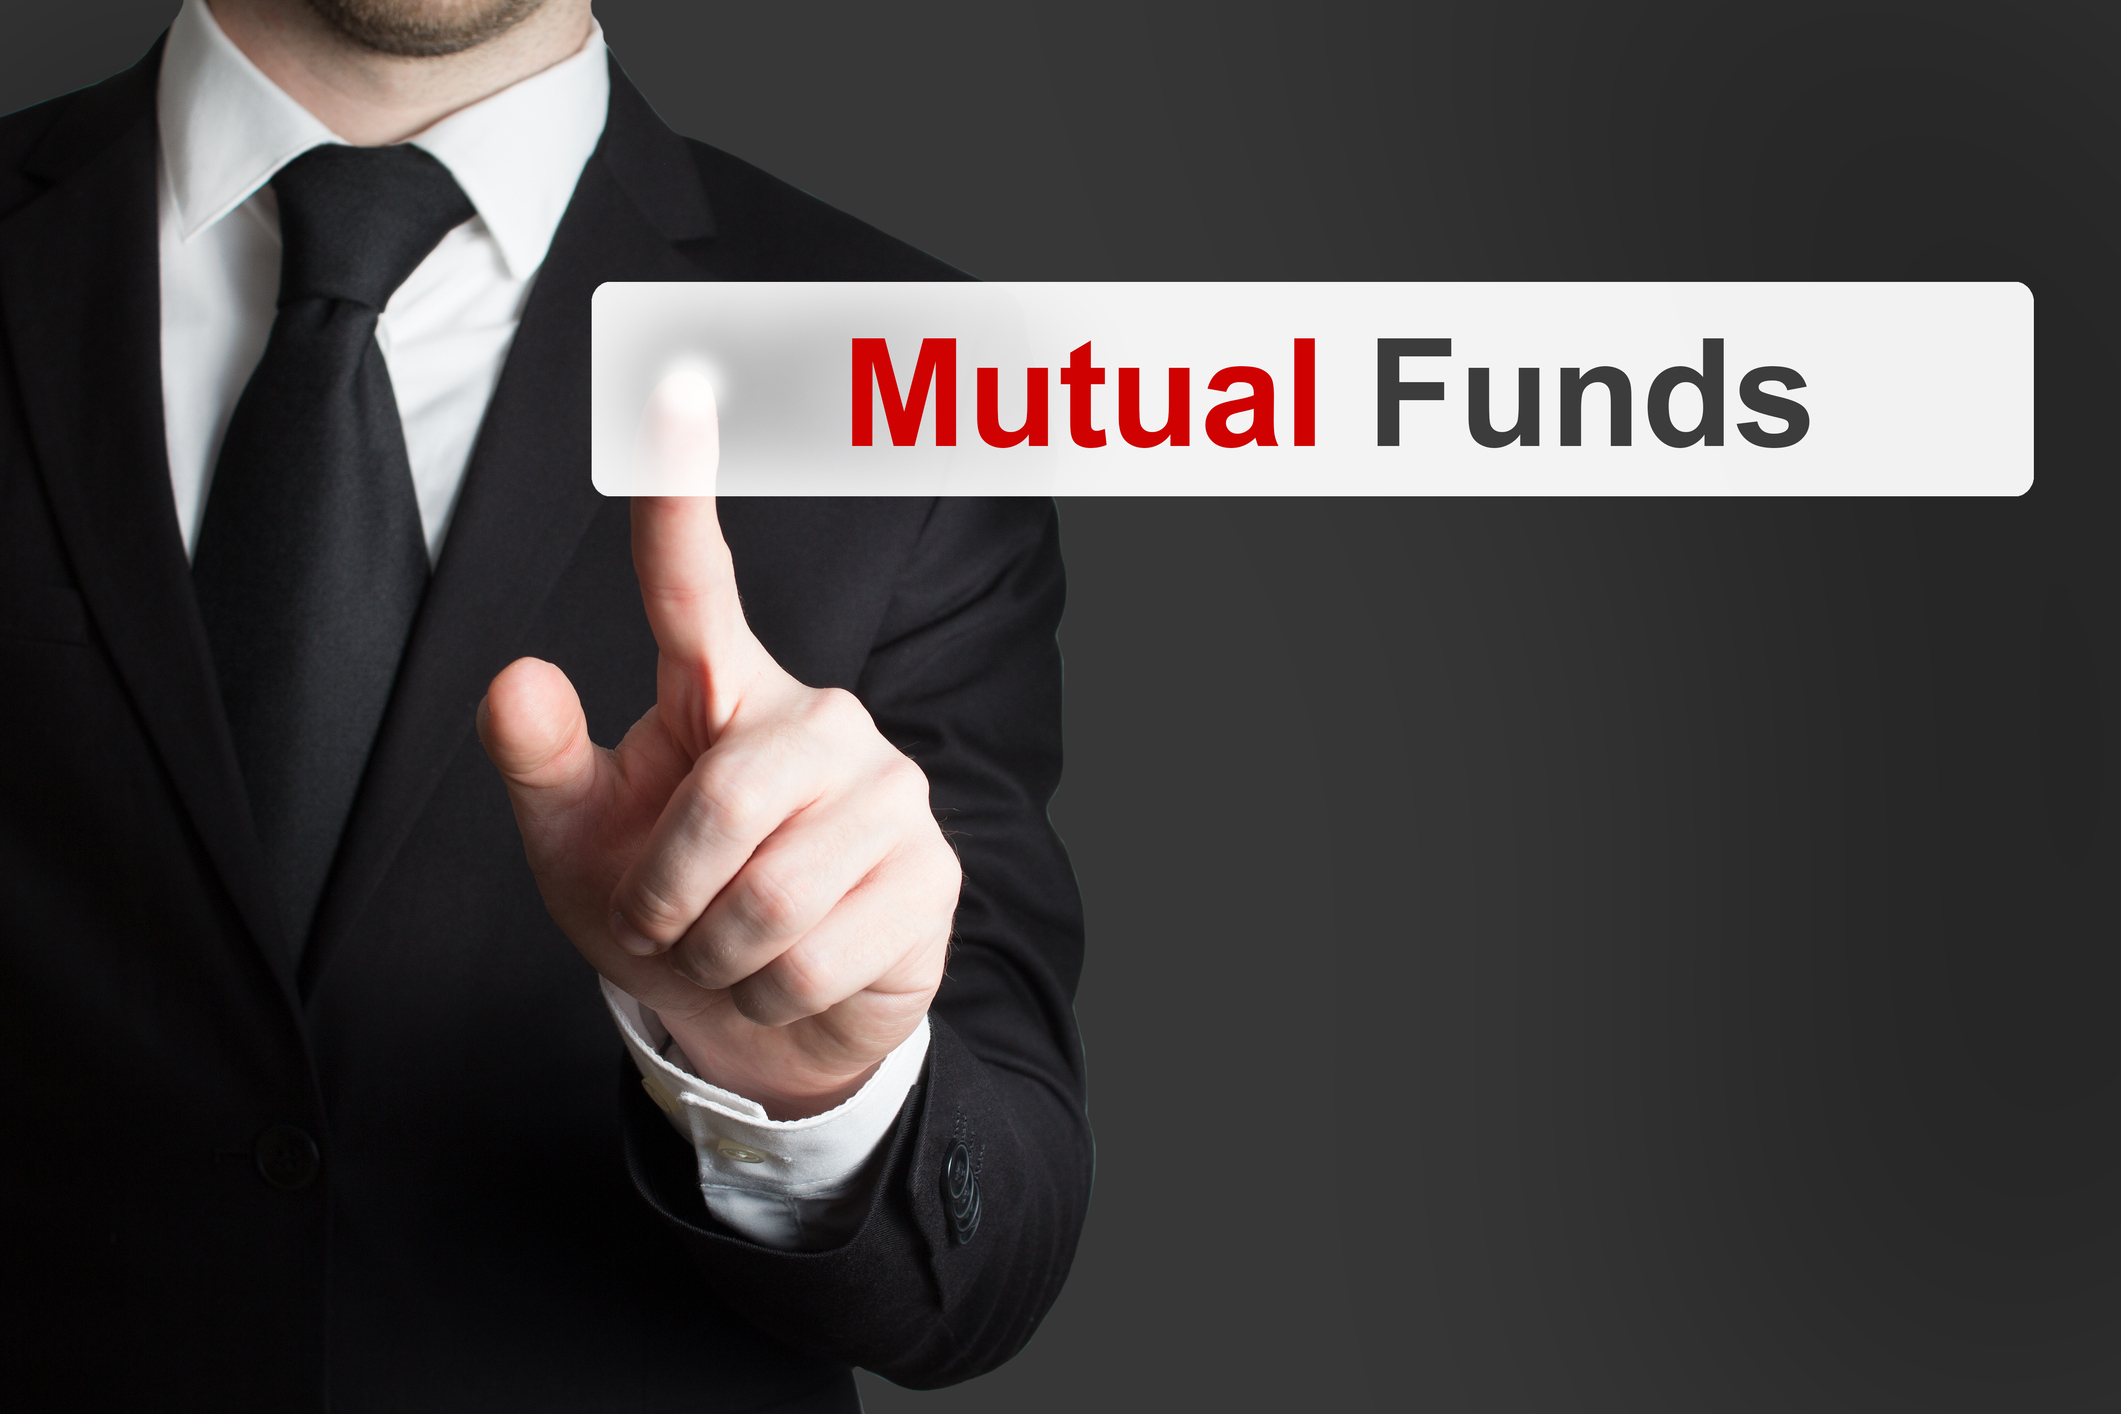 A new look at an old favourite: Modern mutual funds